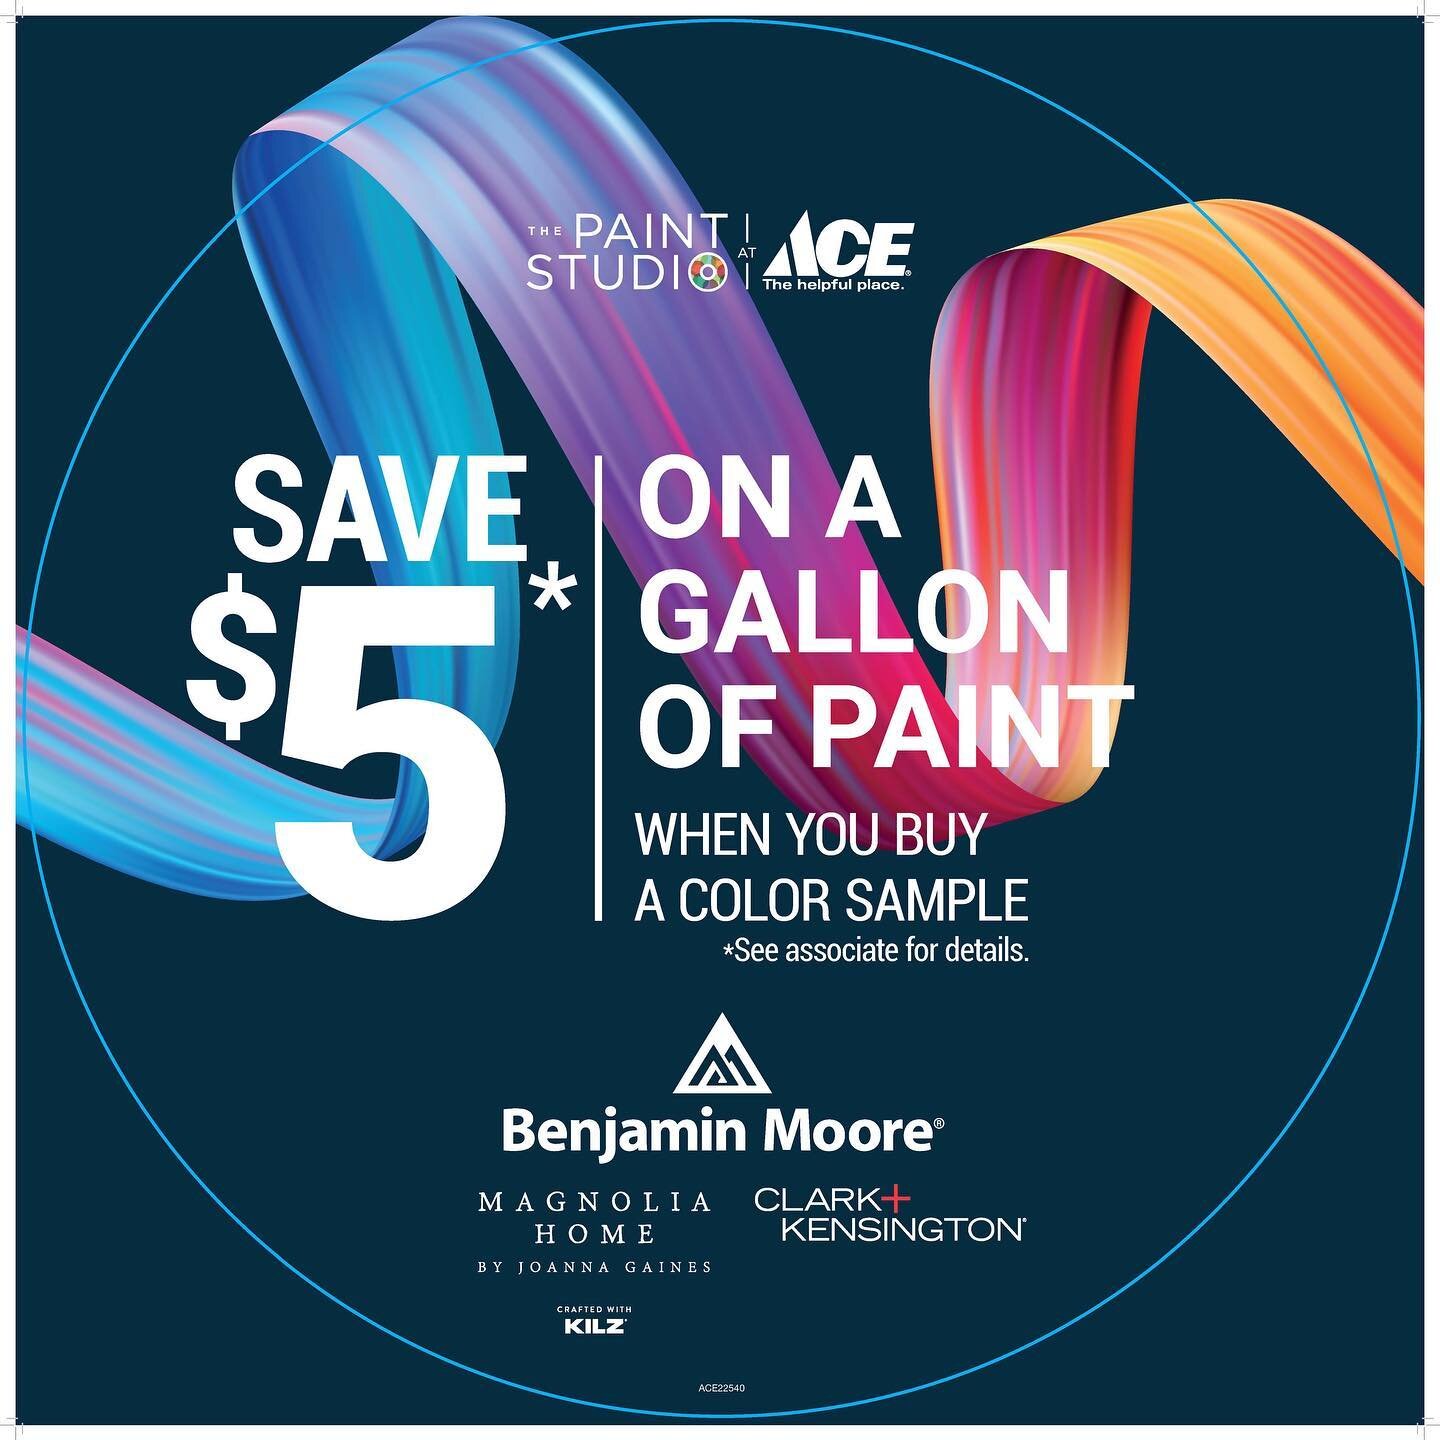 All of August and September save $5 on a gallon of @benjaminmoore paint when you purchase a sample! #diy #painting